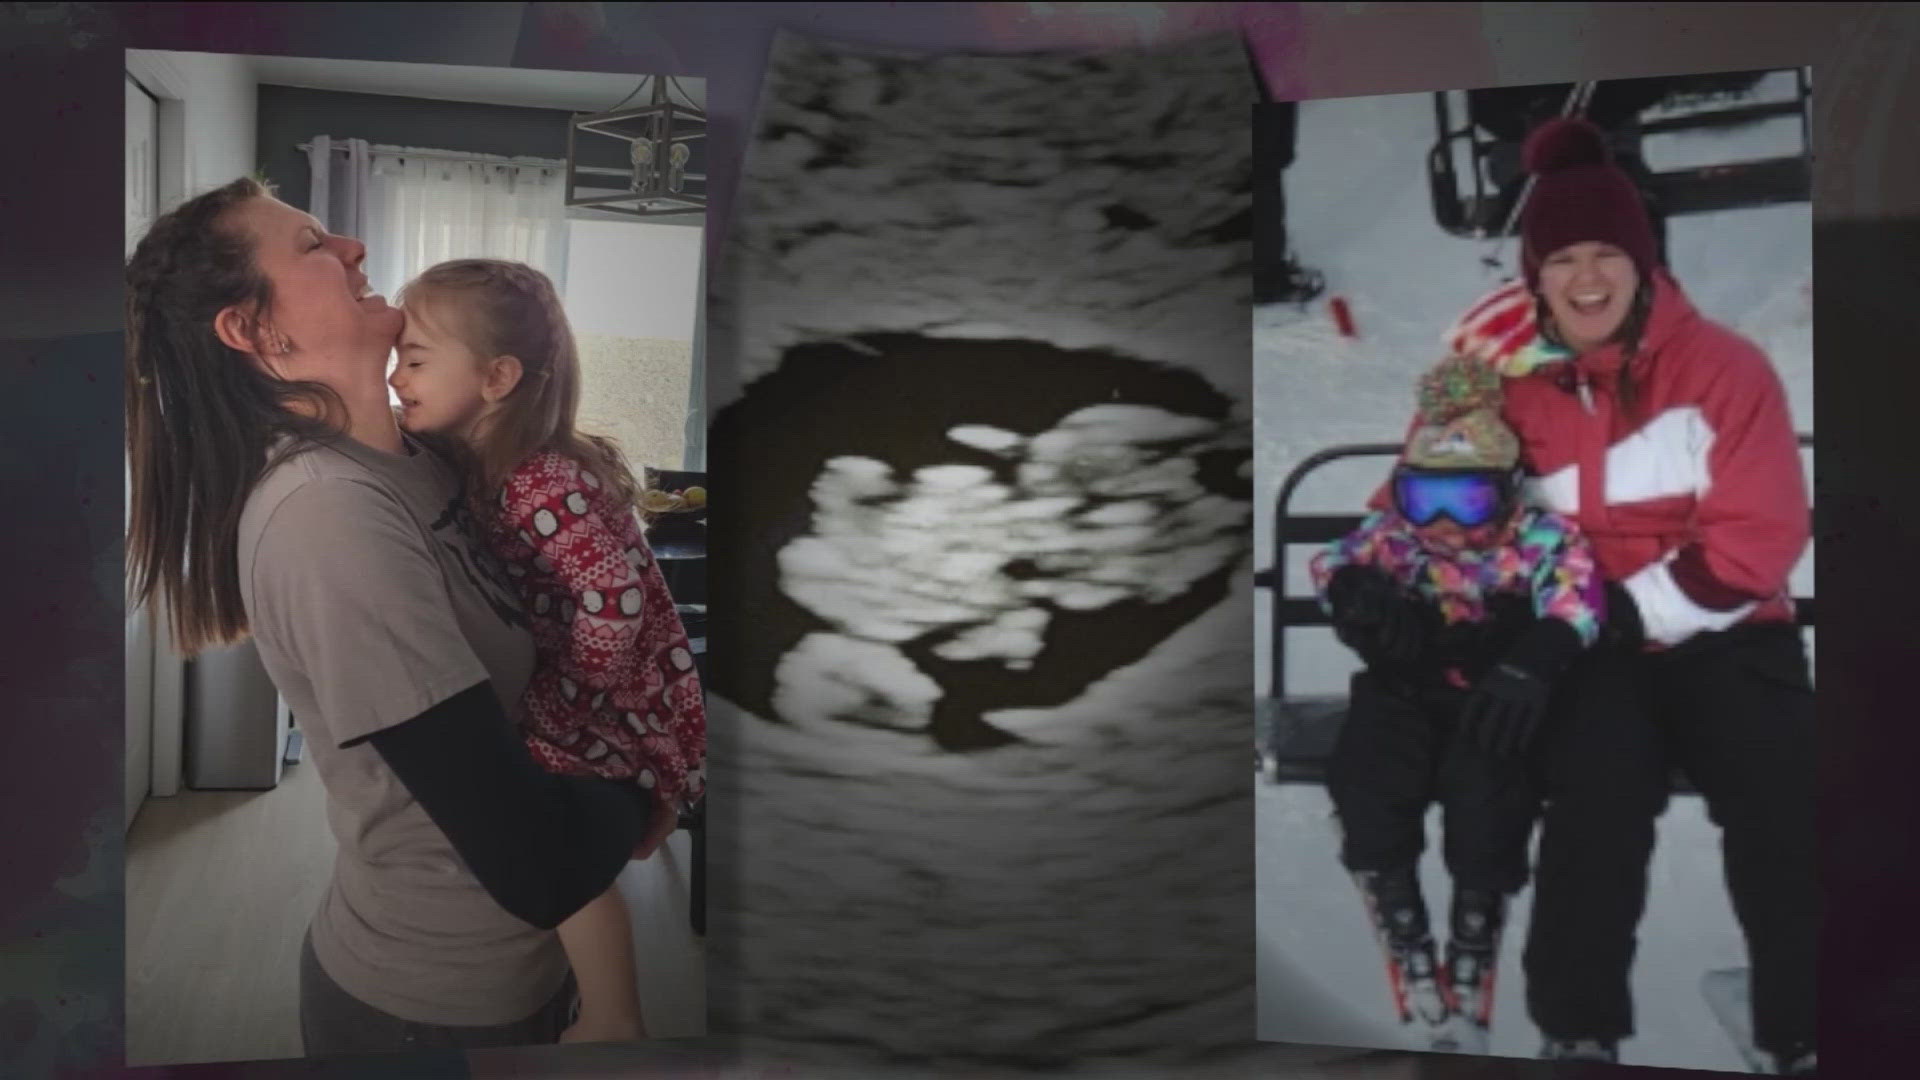 Two pregnant women shared their stories with KTVB about their pregnancy complications which risked their health.